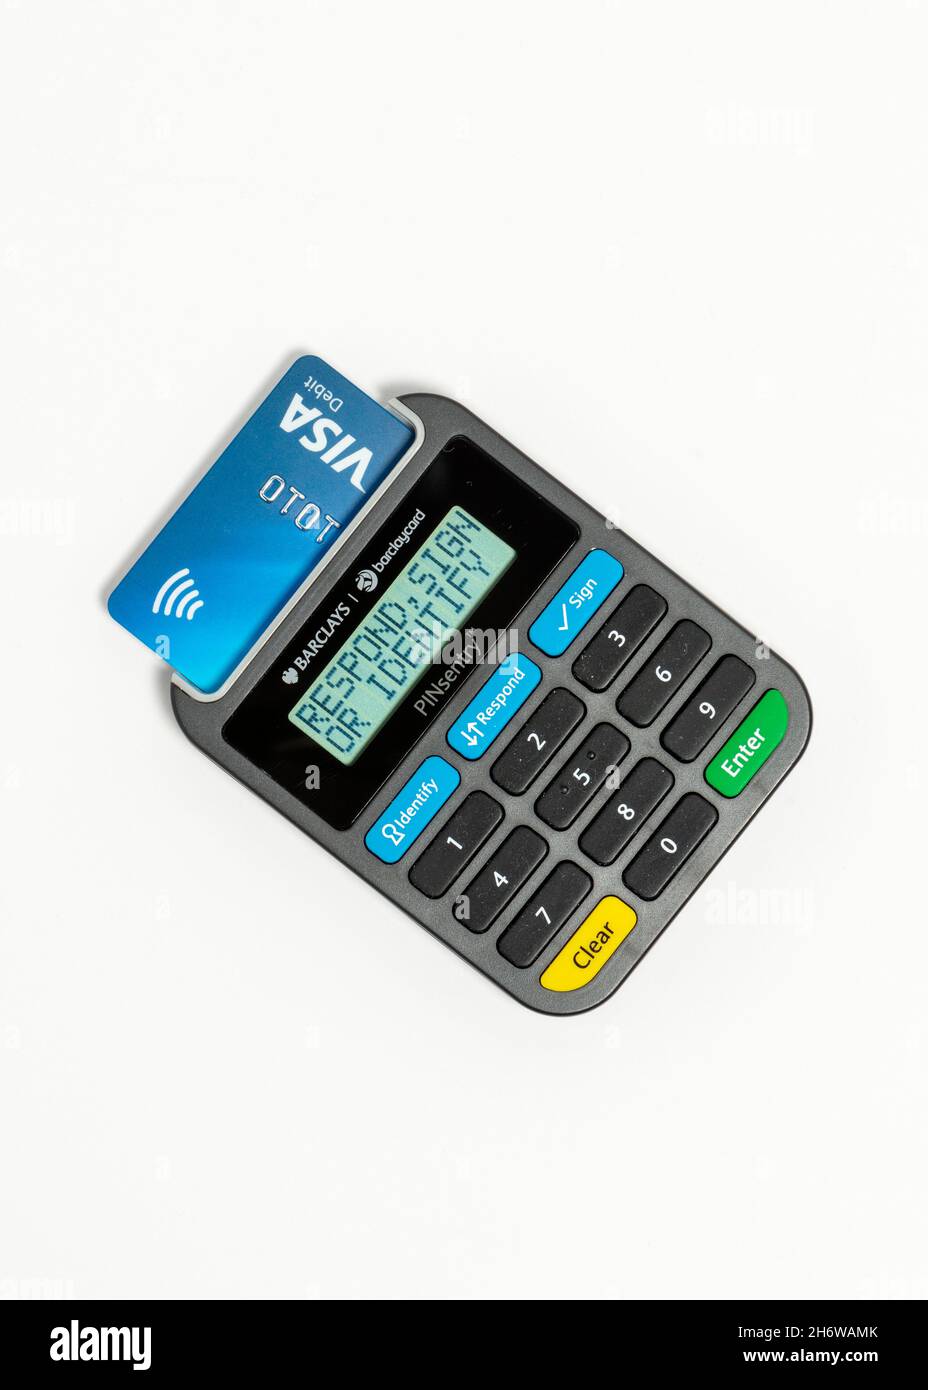 Barclays Pinsentry card reader device Stock Photo